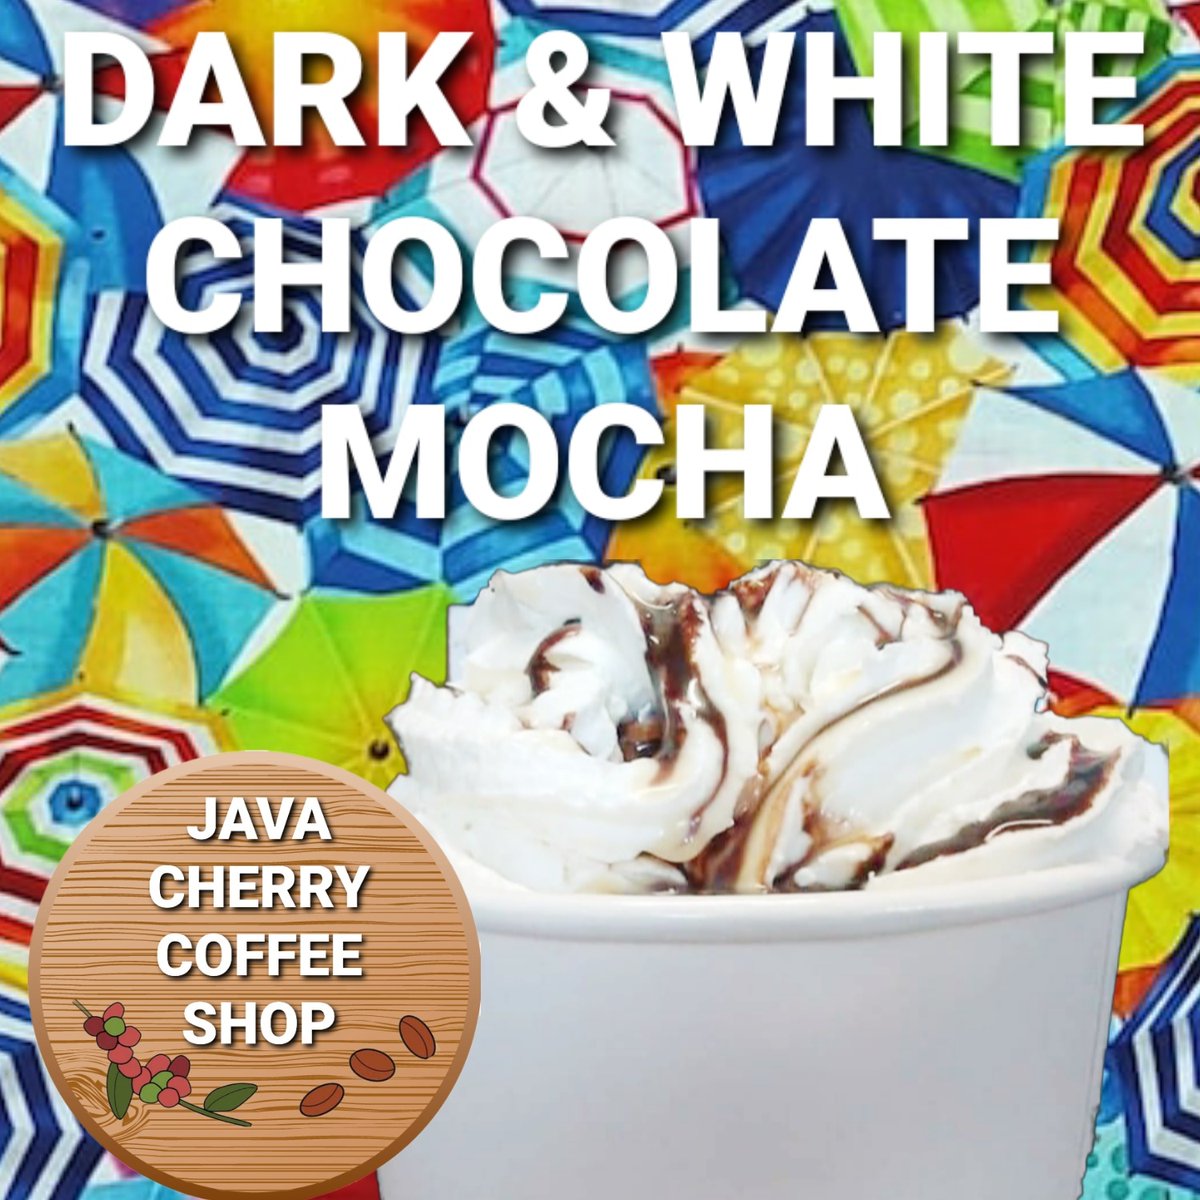 Today's JAVA CHERRY drink special is a DARK AND WHITE CHOCOLATE MOCHA.  Mention this post & receive 10% off your drink. 

#JavaCherry #CitrusHeights #ShopSmall  #TheMadBatter #HomeBakedCake #Vanelis #Coffee #DaysDeal #mocha #Espresso #DarkChocolate #WhiteChocolate #Spring